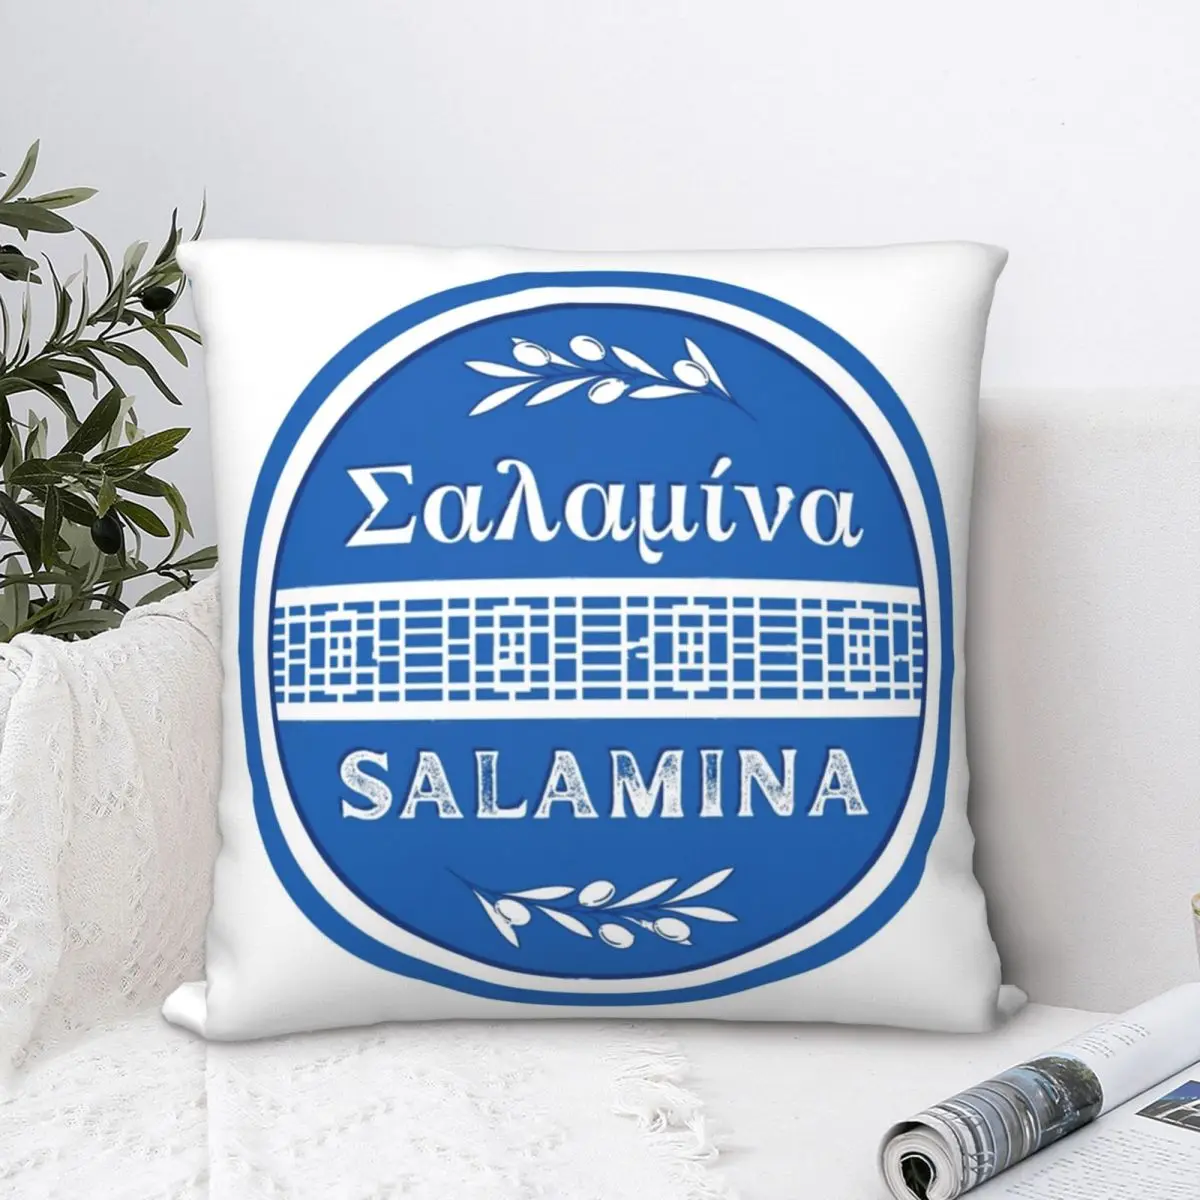 Greek Island Of Salamina Square Pillowcase Polyester Pillow Cover Velvet Cushion Zip Decorative Comfort Throw Pillow for home